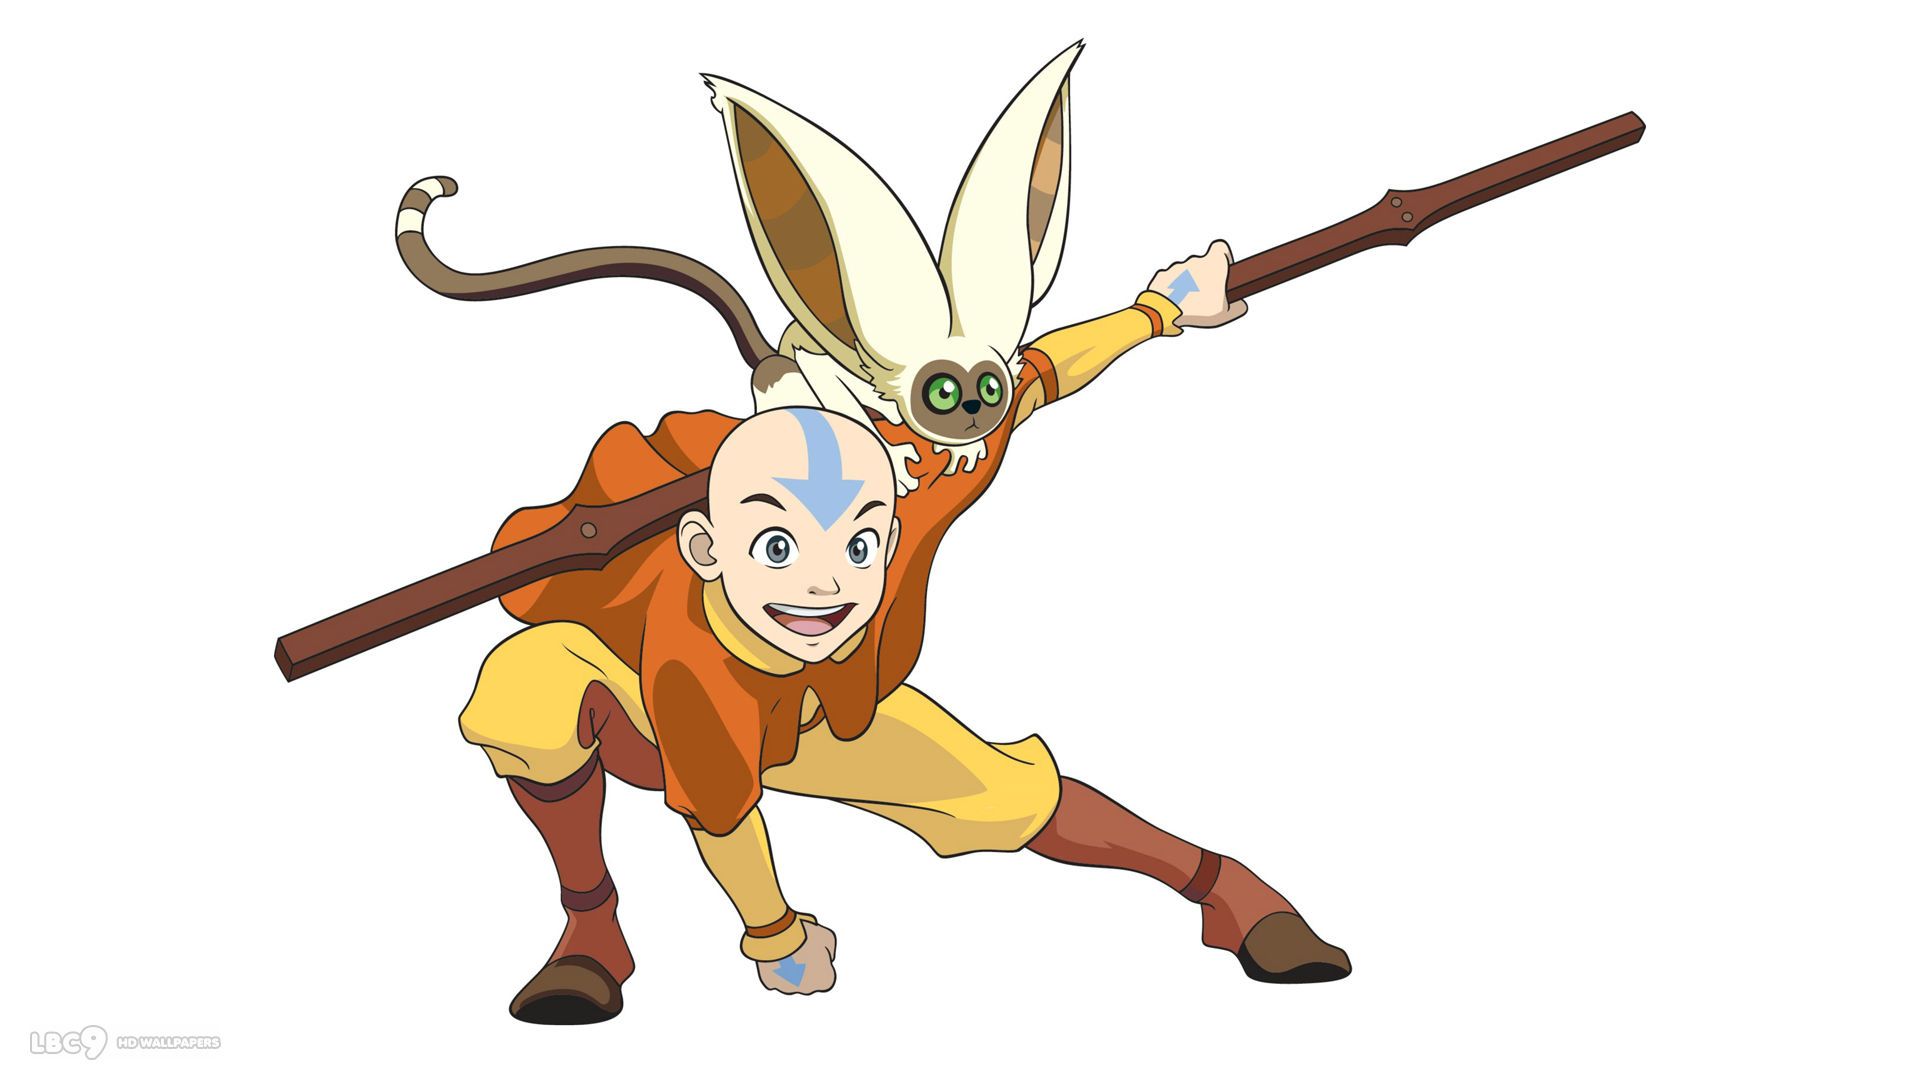 Free download Avatar The Last Airbender Desktop Wallpaper HD Desktop Wallpaper [1920x1080] for your Desktop, Mobile & Tablet. Explore The Last Airbender Wallpaper. Avatar The Last Airbender Wallpaper, Avatar